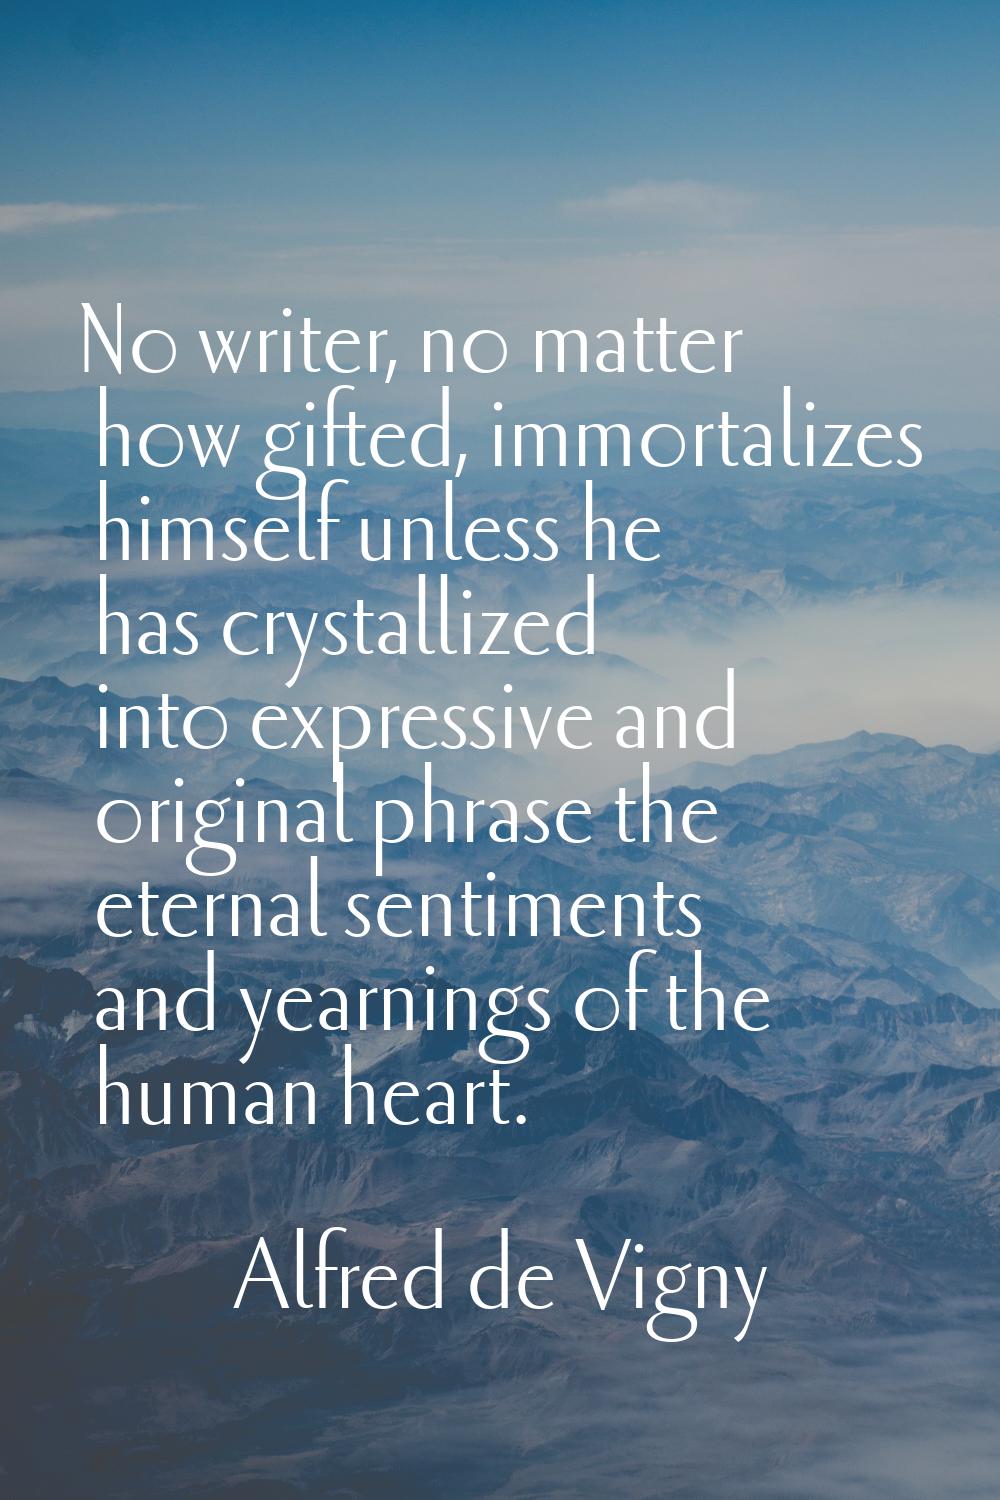 No writer, no matter how gifted, immortalizes himself unless he has crystallized into expressive an